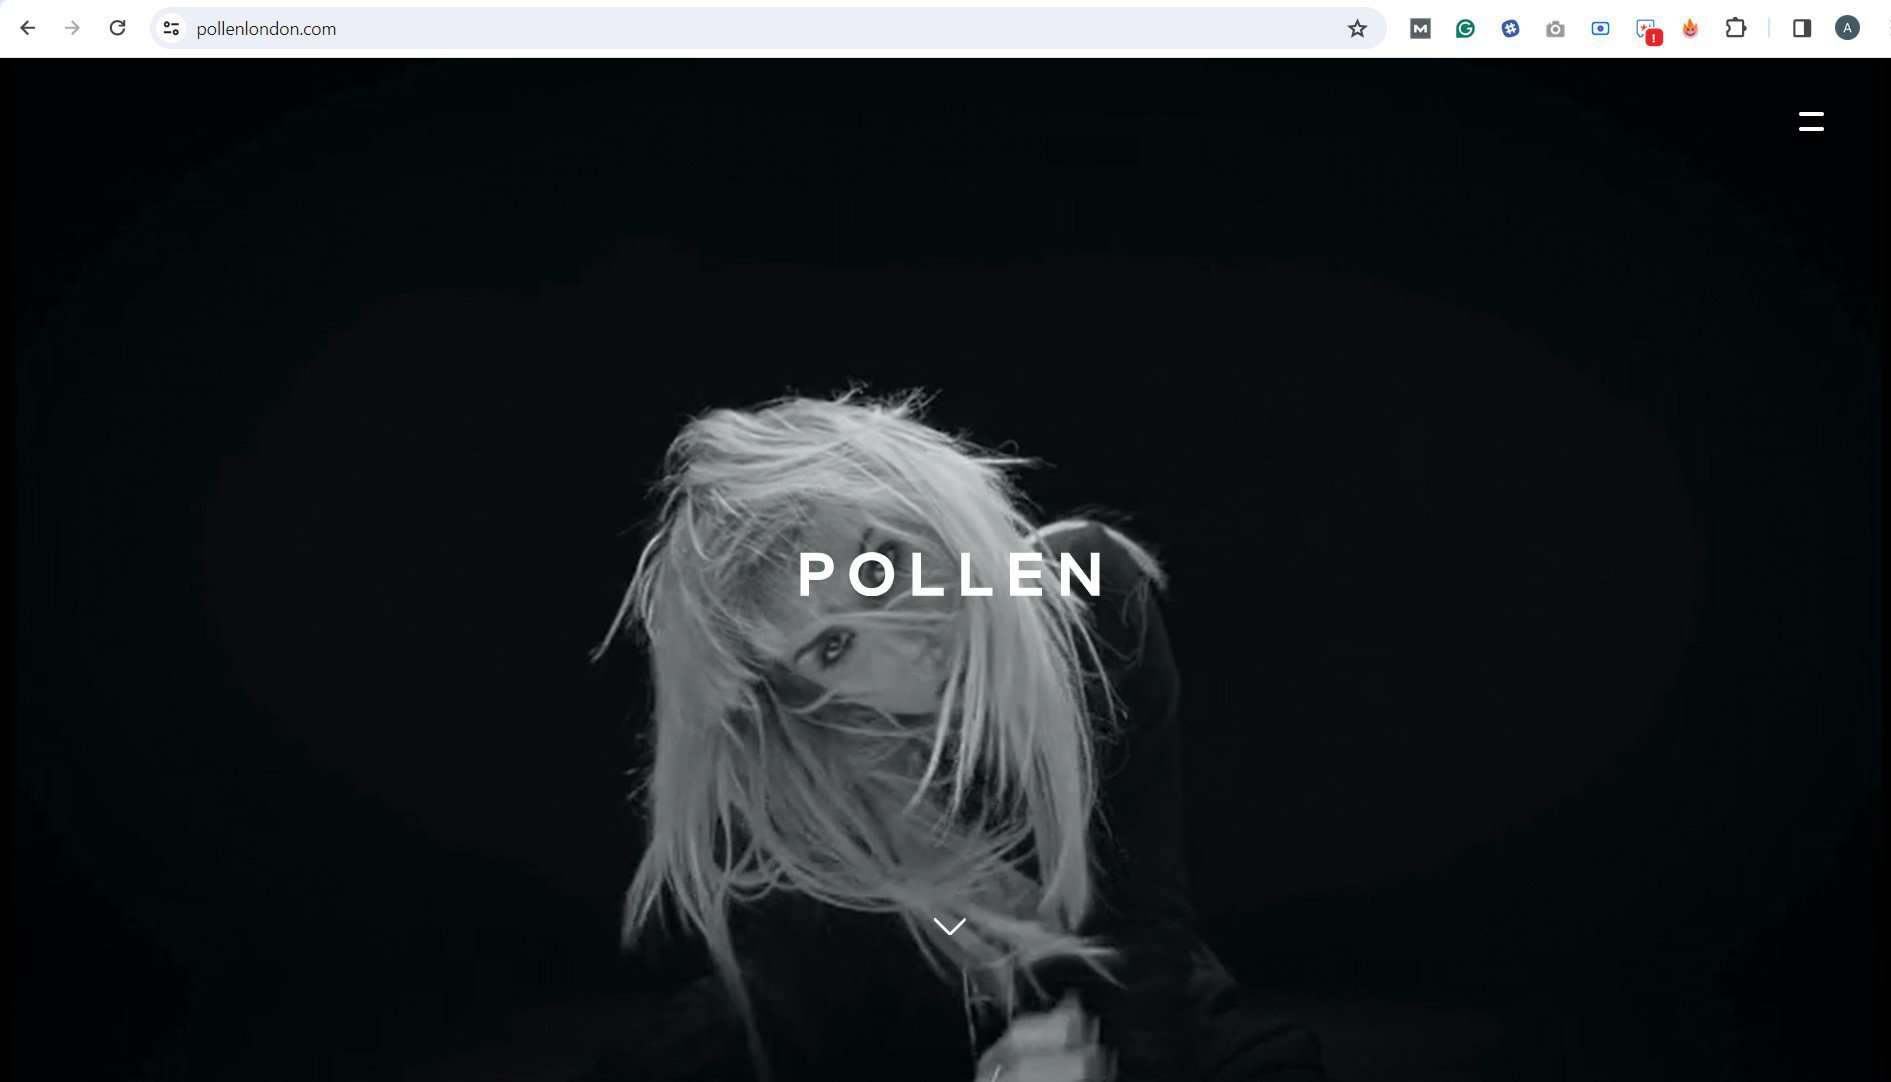 Pollen London web design - video taking up entire area above the fold